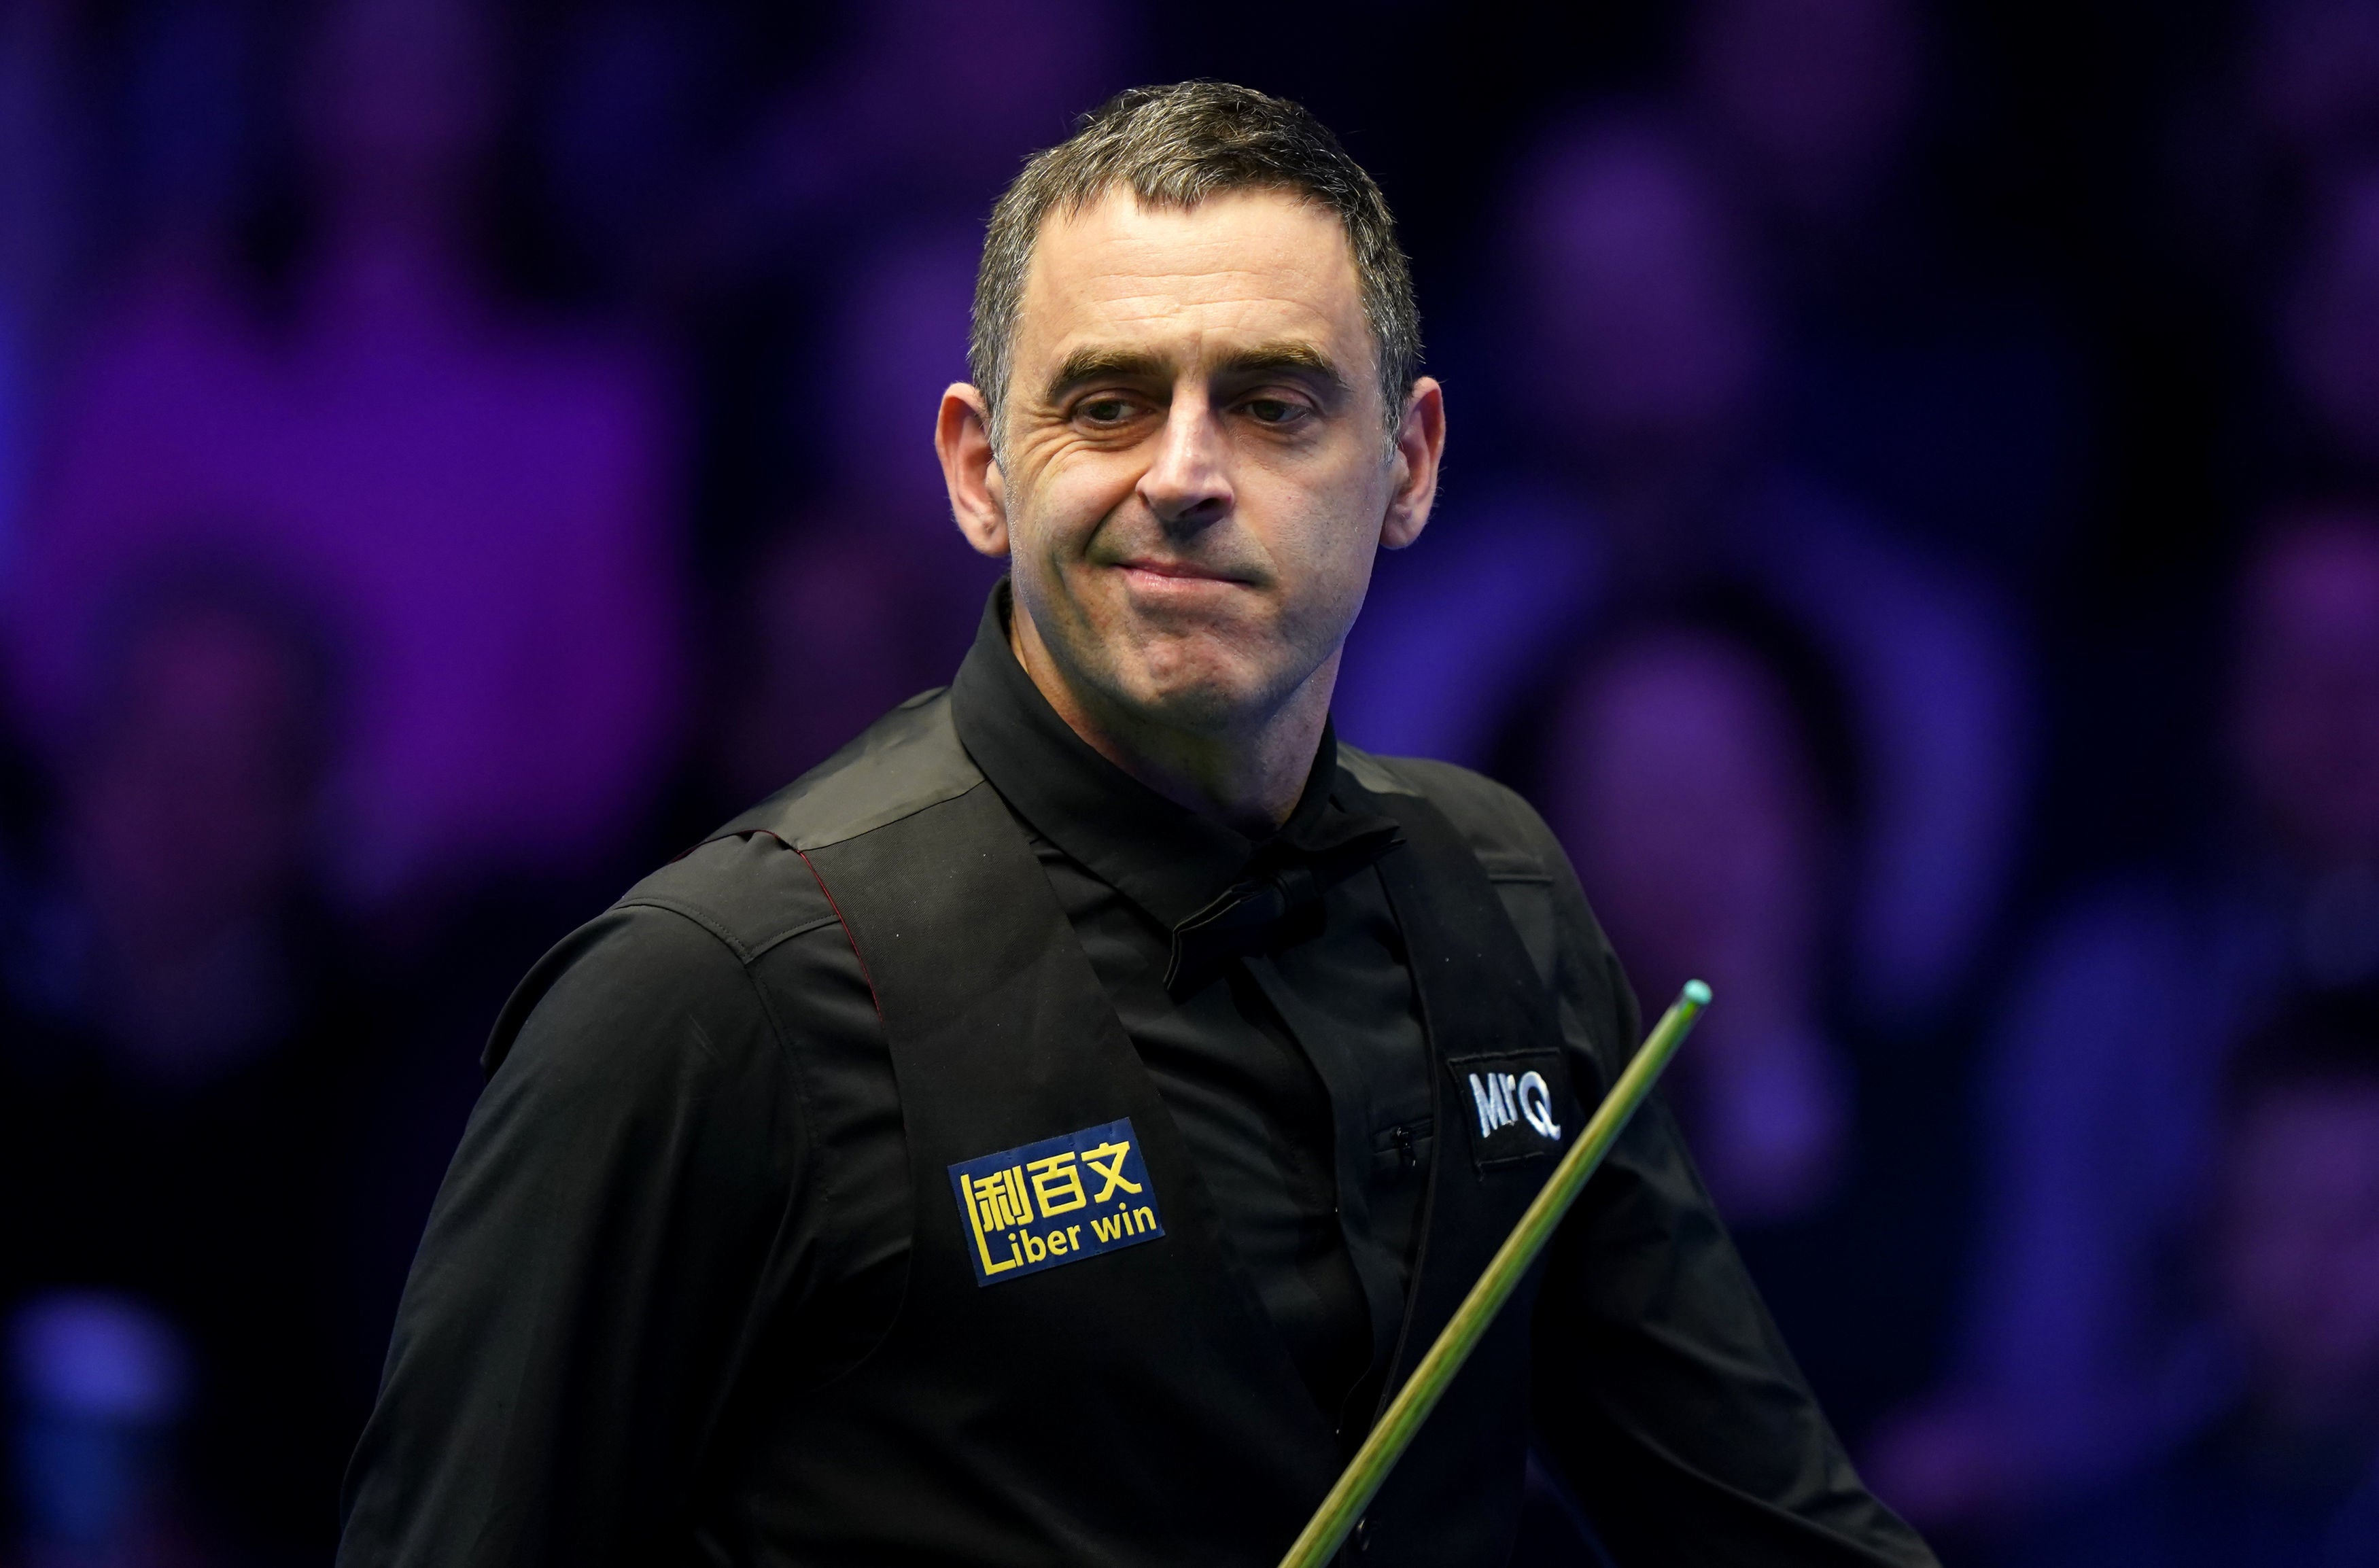 Ronnie O’Sullivan is into a 14th Masters final